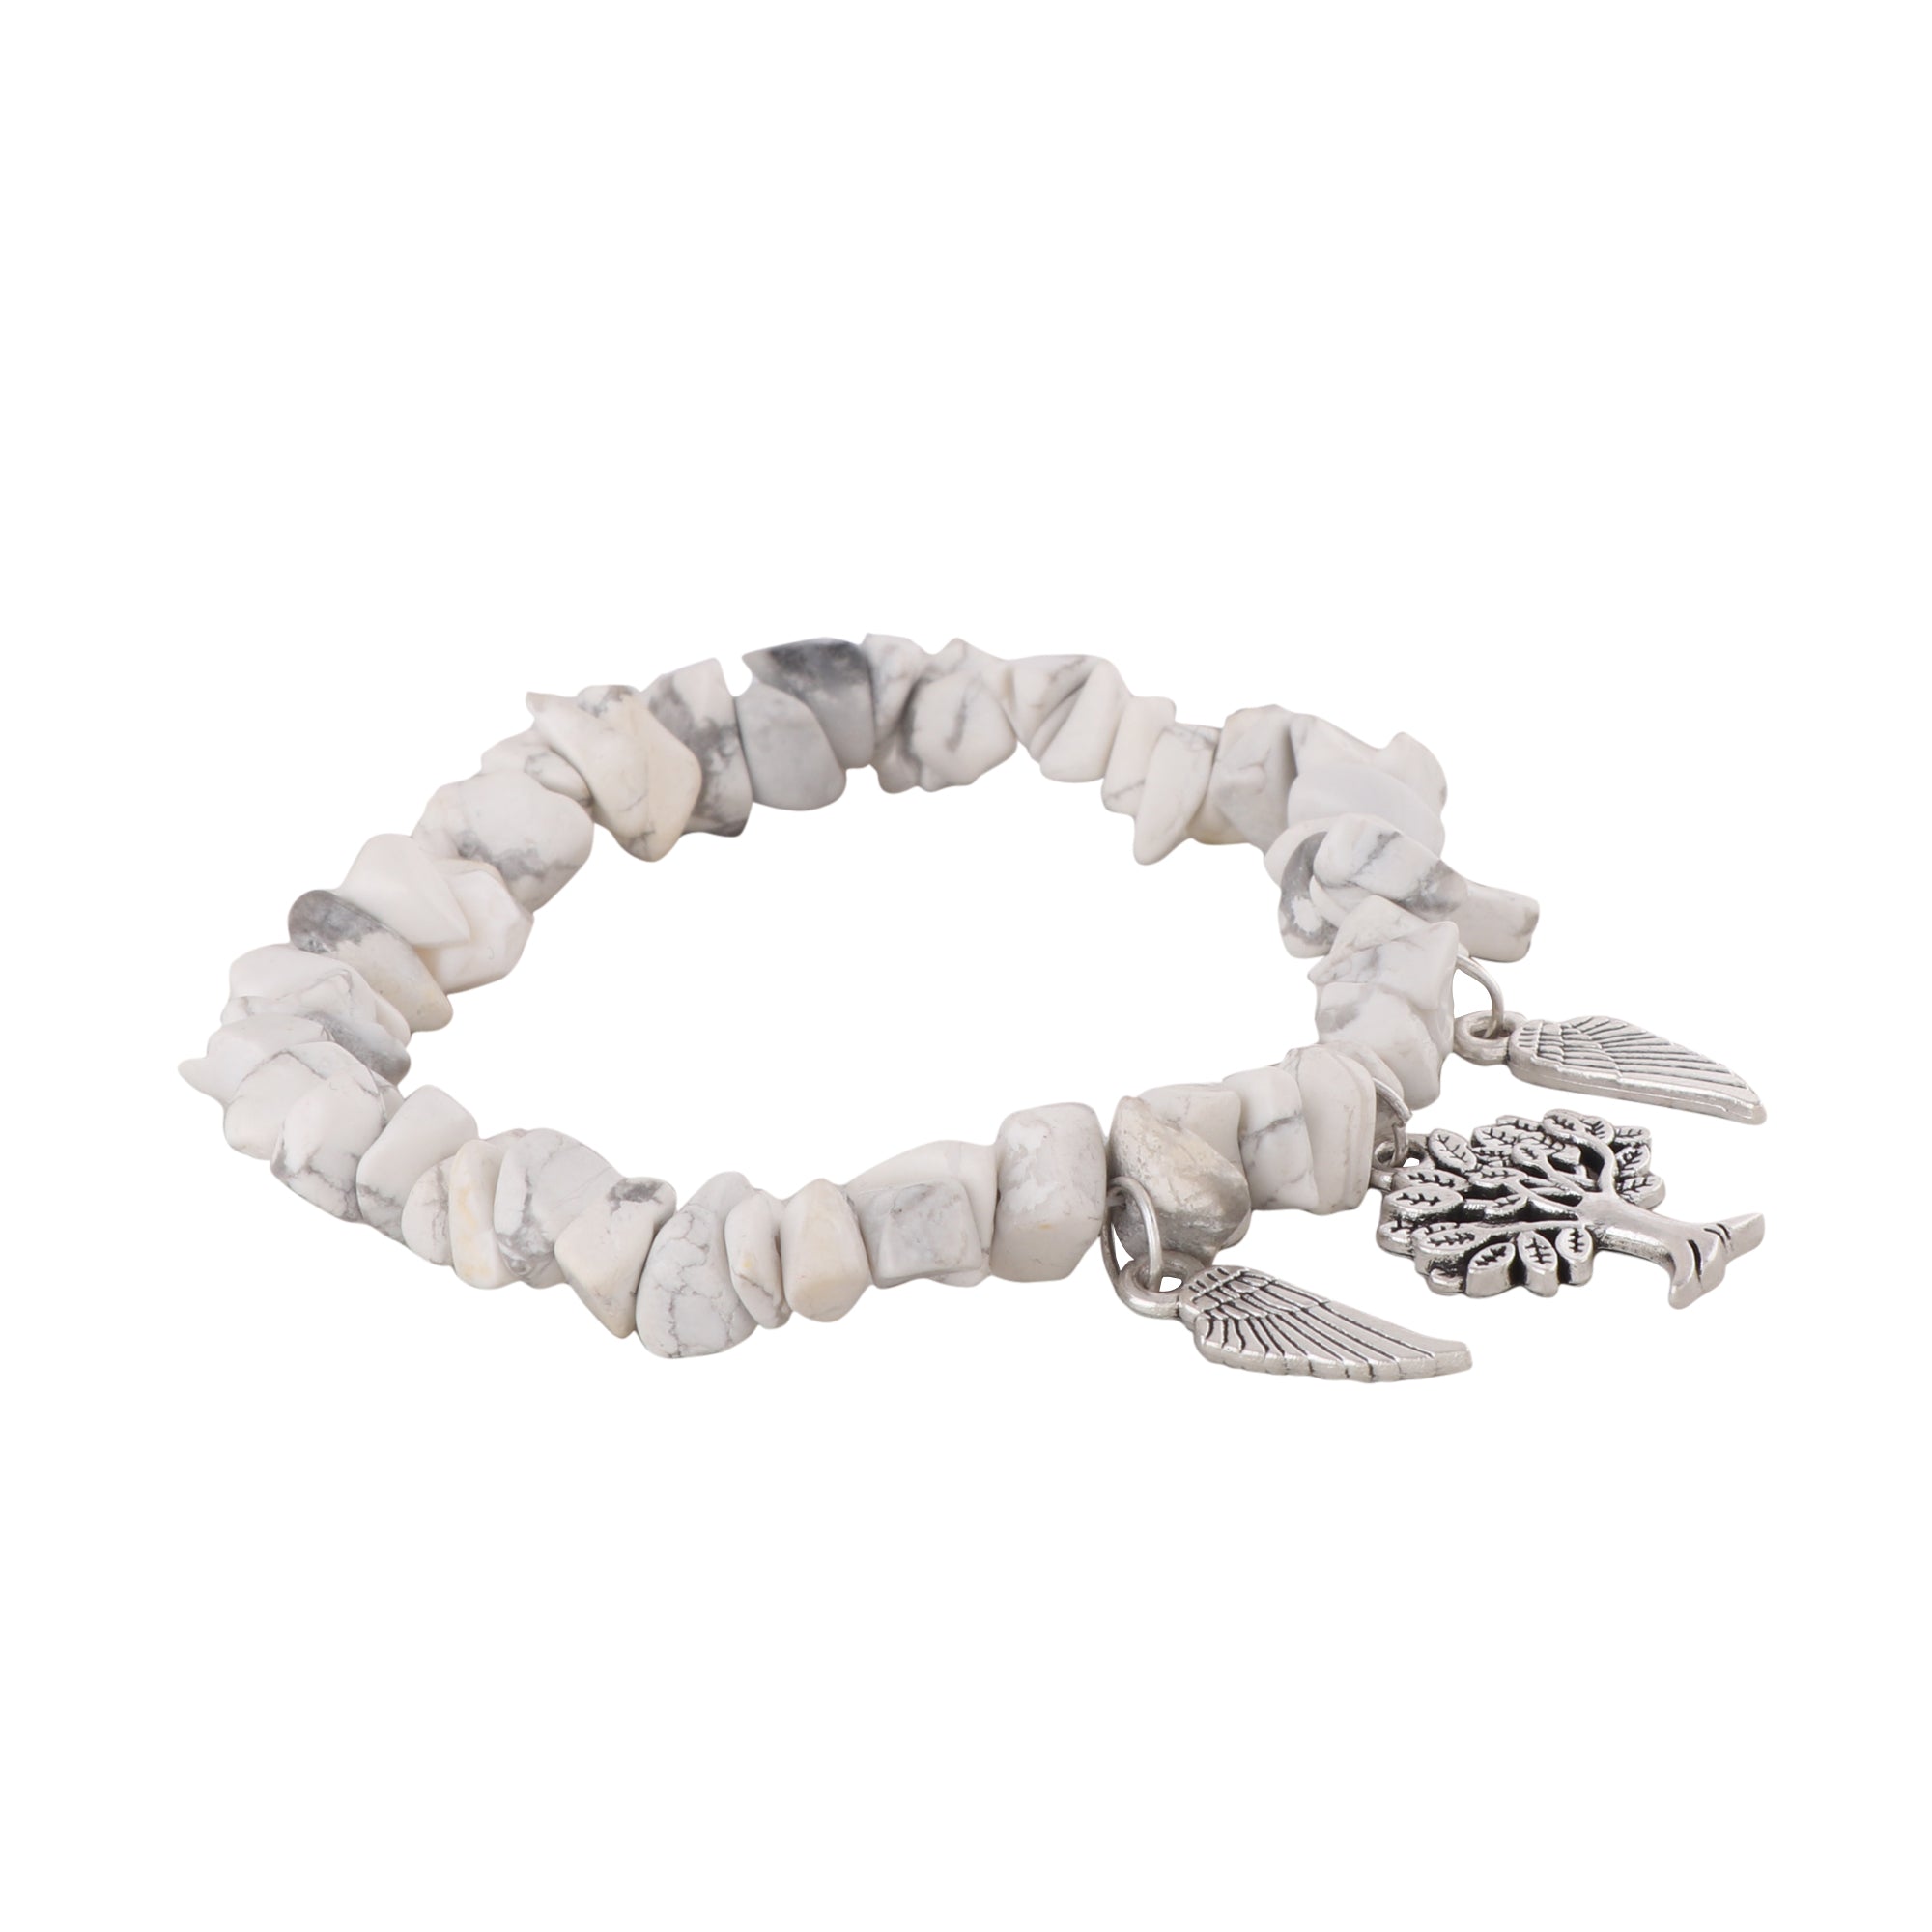 White agate With Pendant Stretchable Bracelet Natural Gemstone